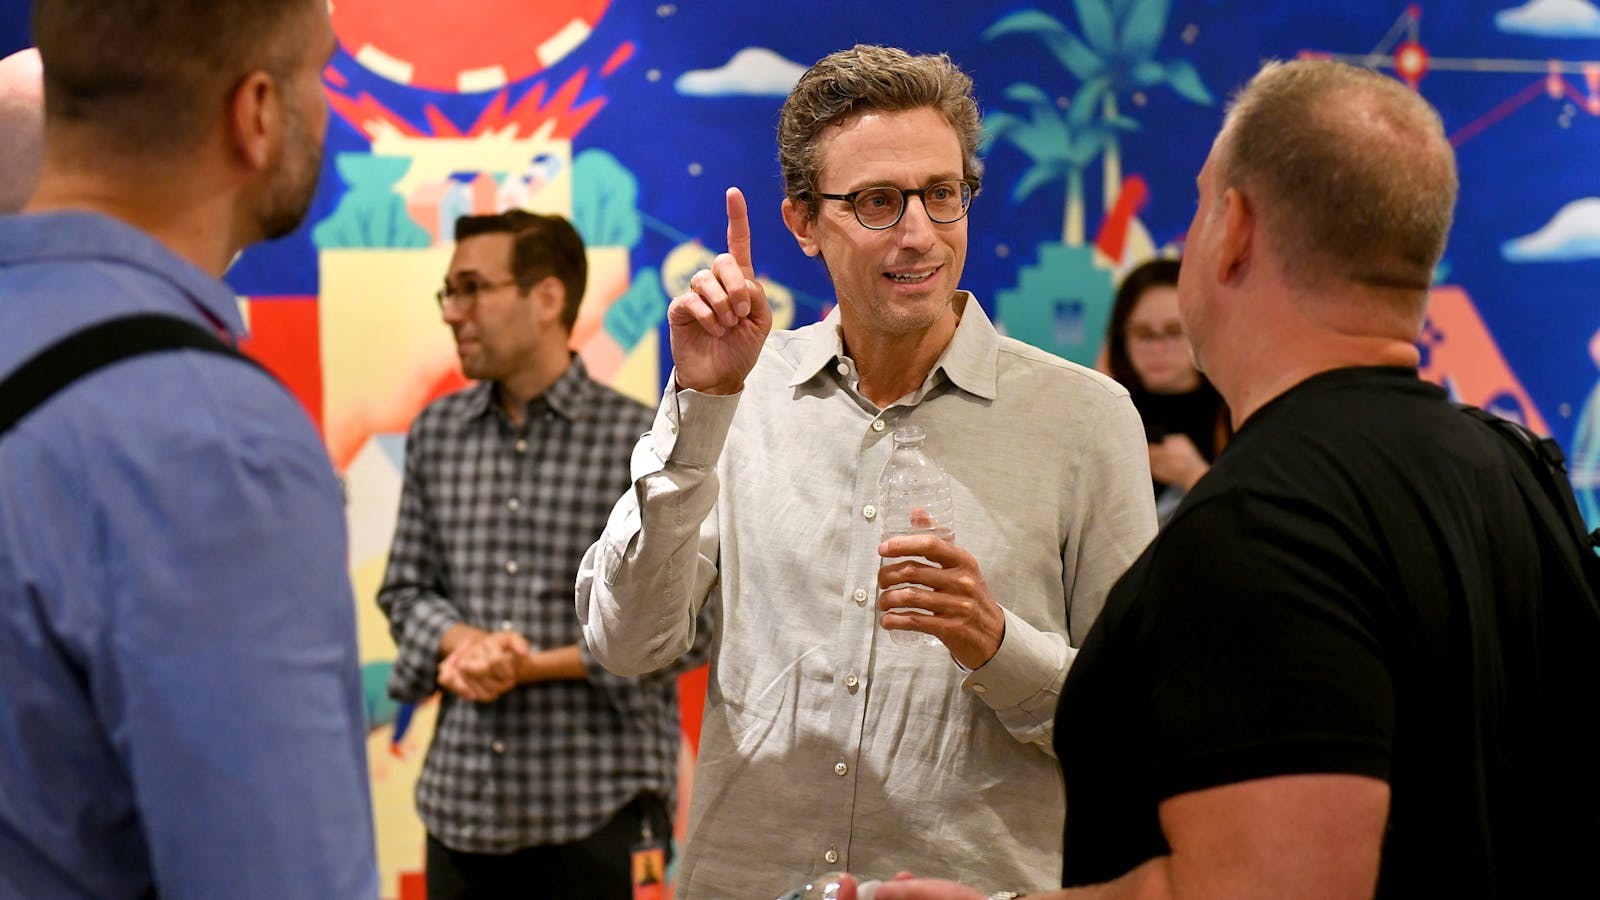 BuzzFeed CEO Jonah Peretti speaks with Justin Killion, former president of Complex Networks, and BuzzFeed's former COO Christian Baesler. Photo by Getty